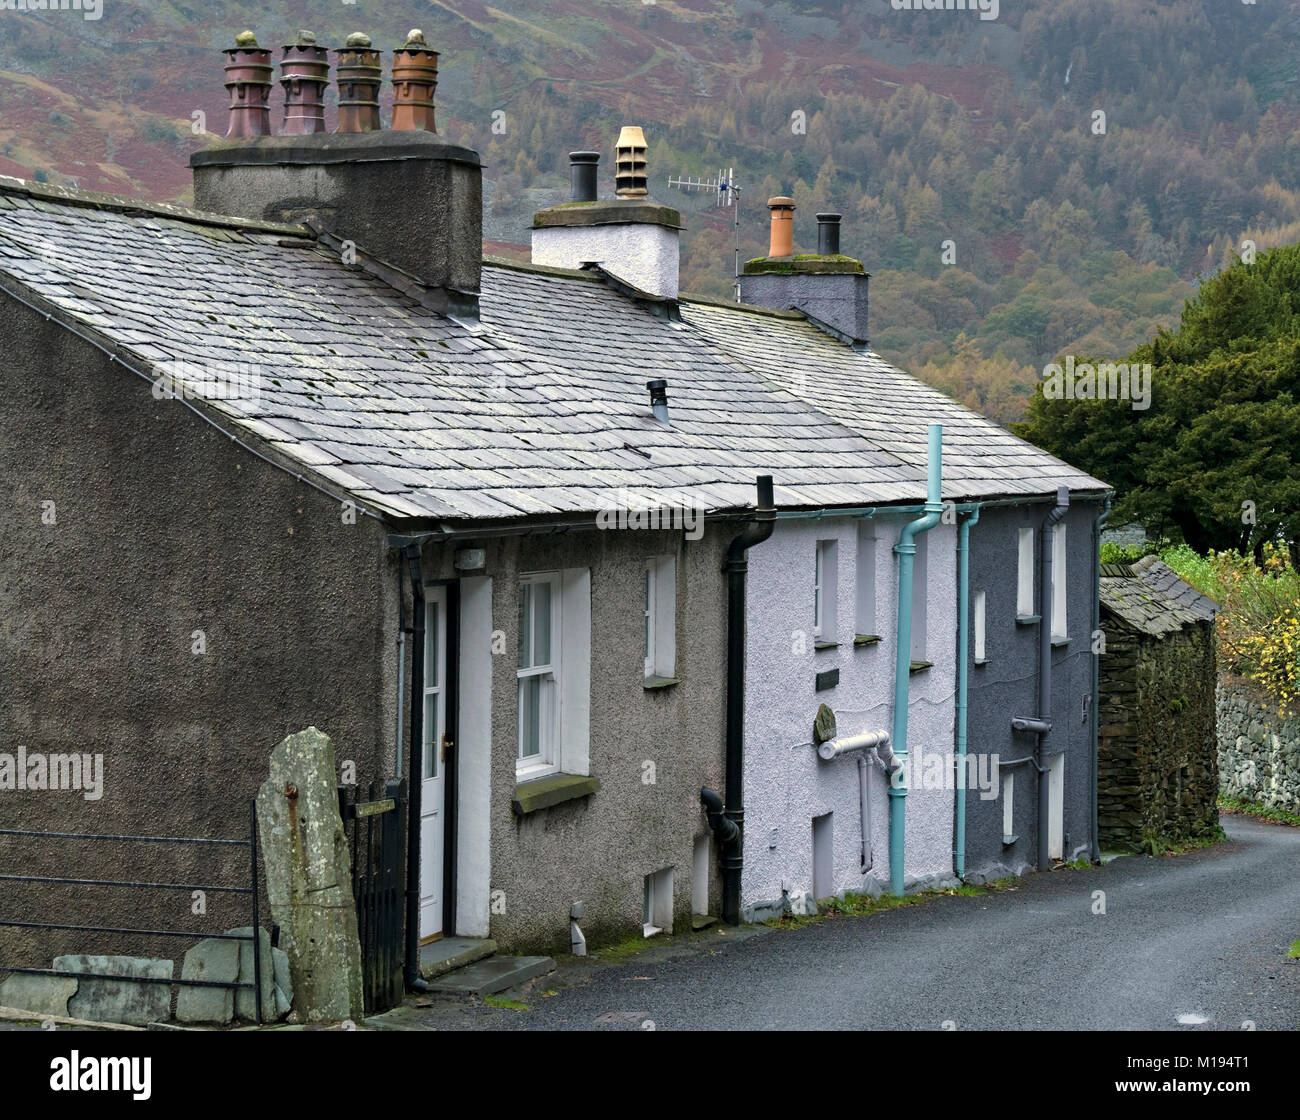 Row of terraced old cottages with grey slate roofs and chimneys, Chapel Stile, Langdale, Cumbria, England, UK. Stock Photo